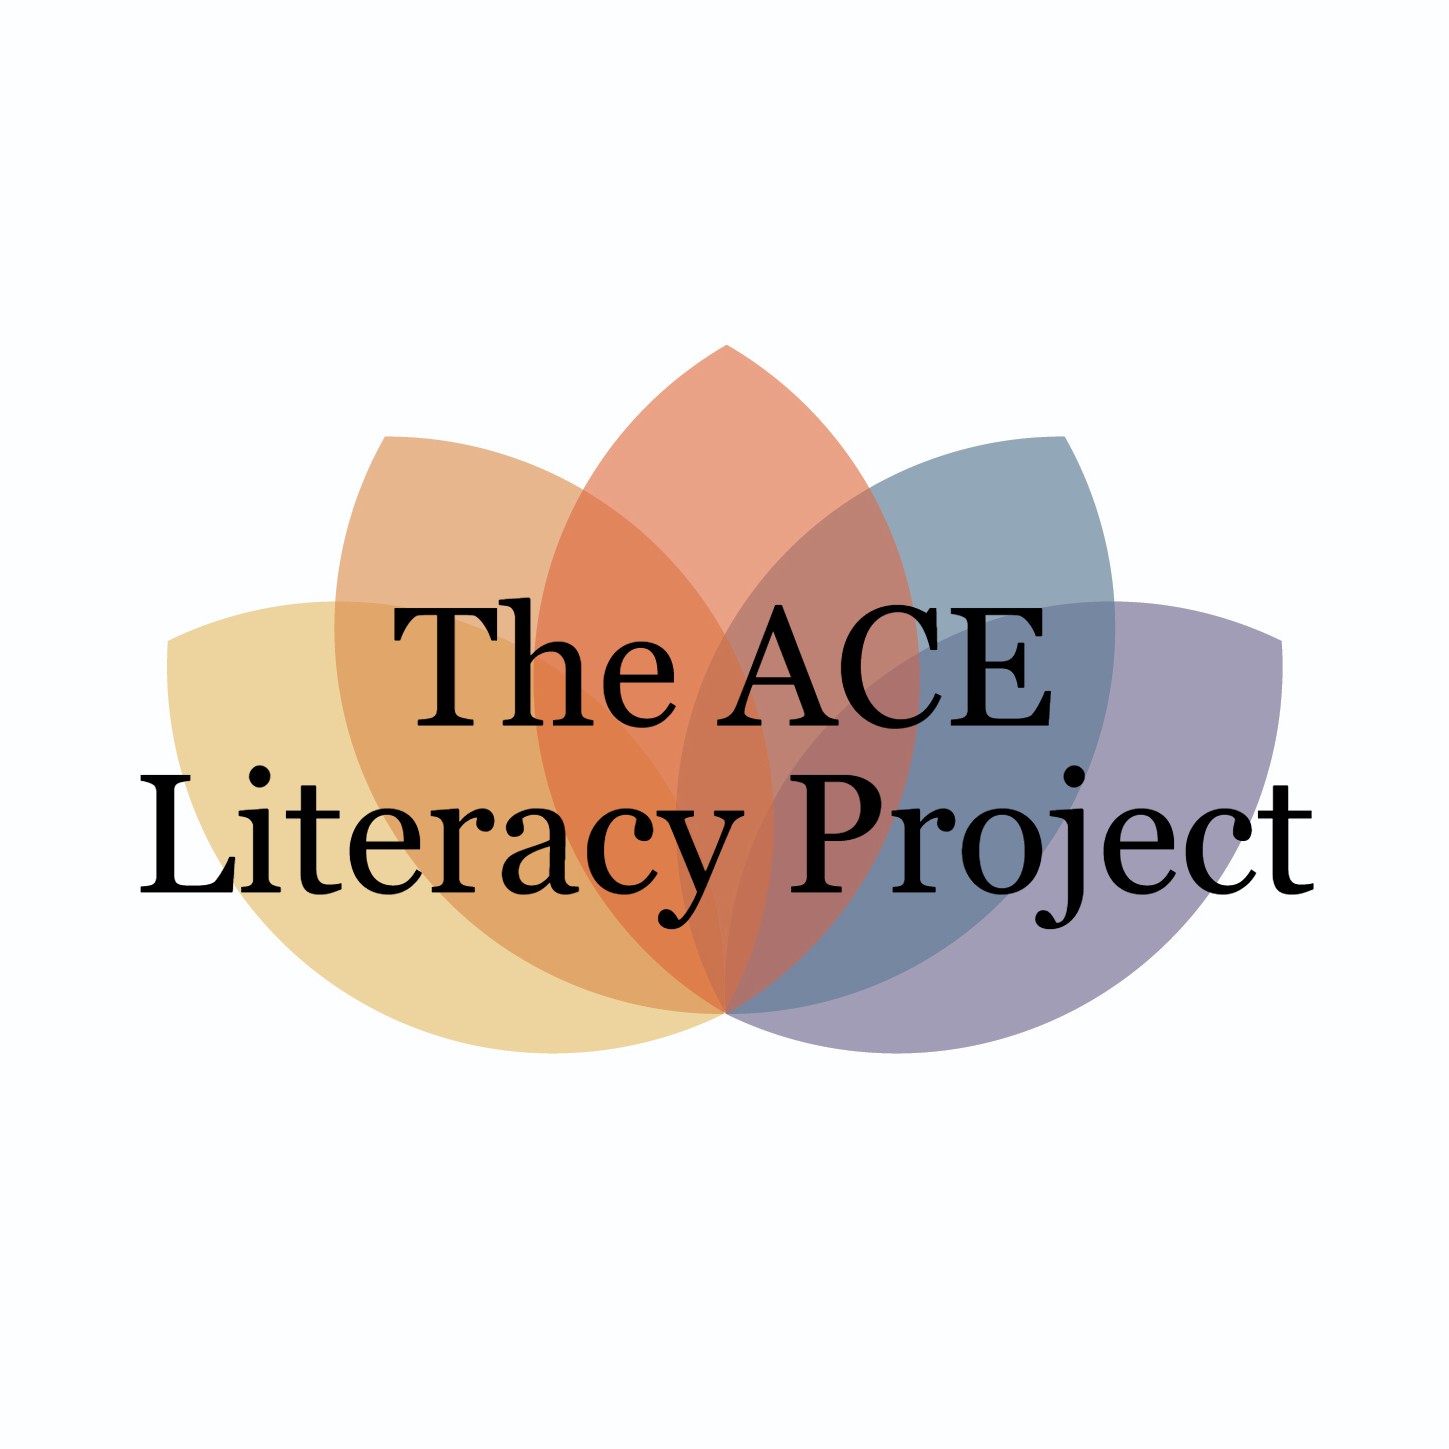 The ACE Literacy Project